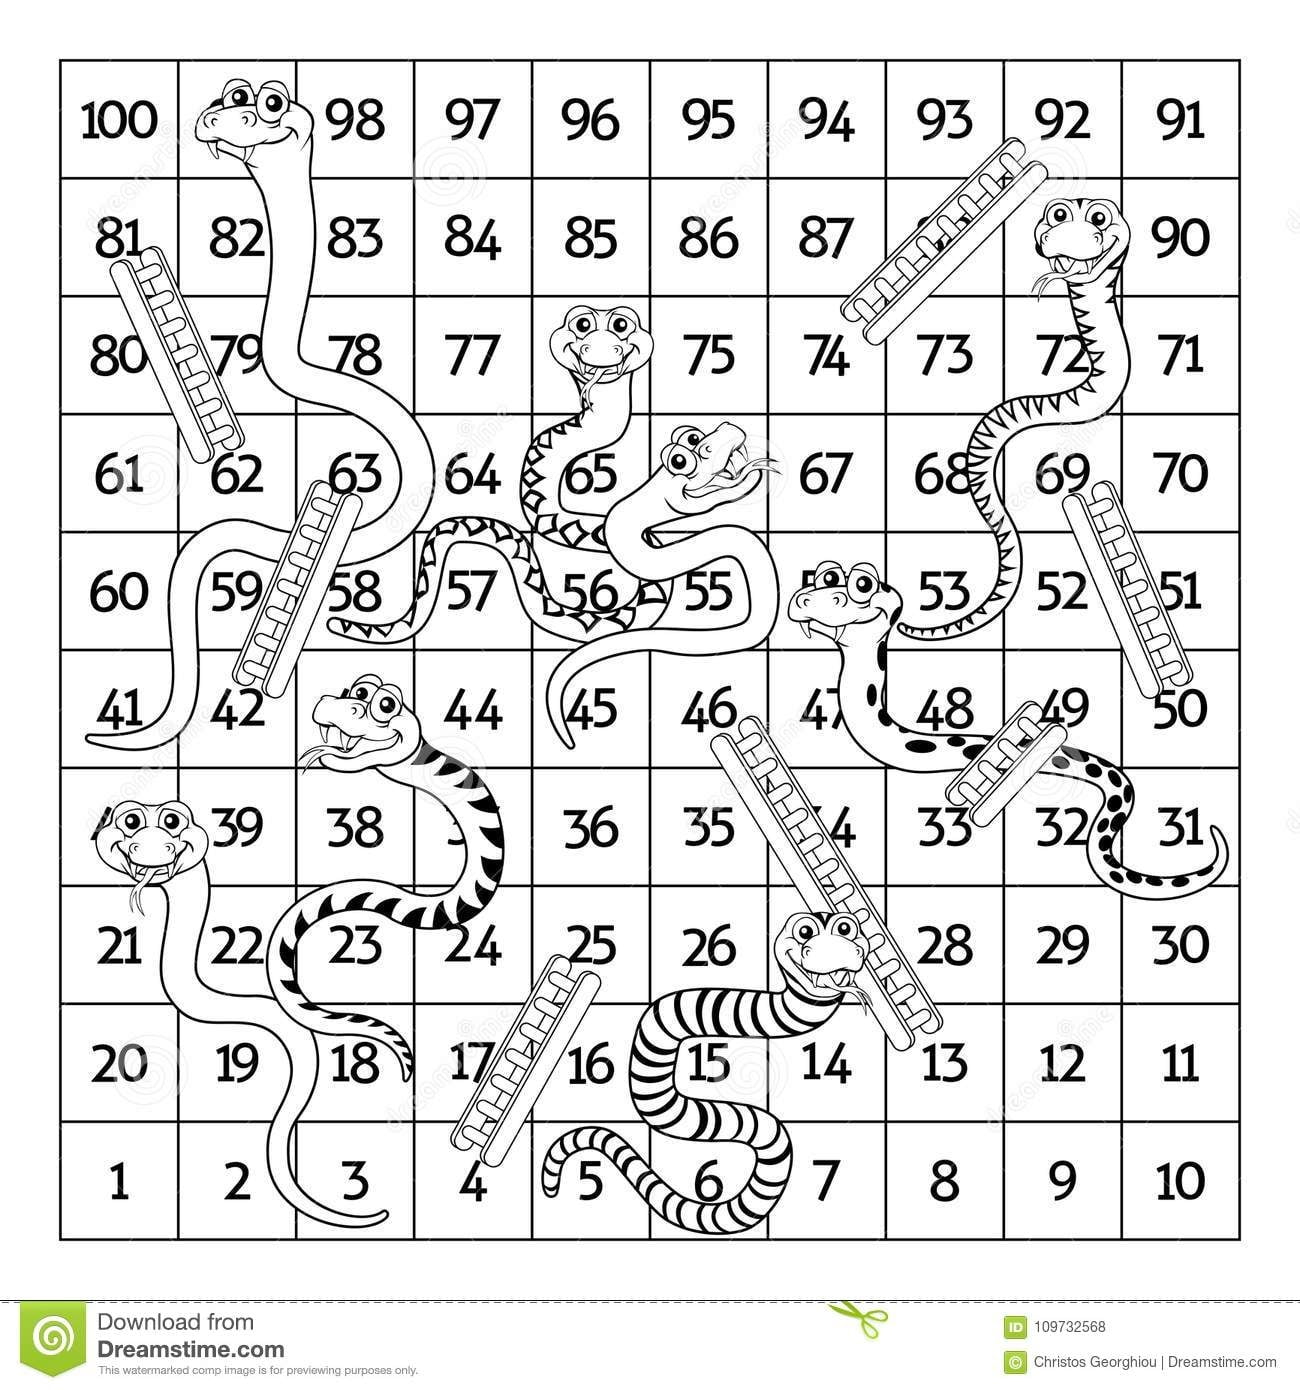 Snakes And Ladders Board Game Template Printable